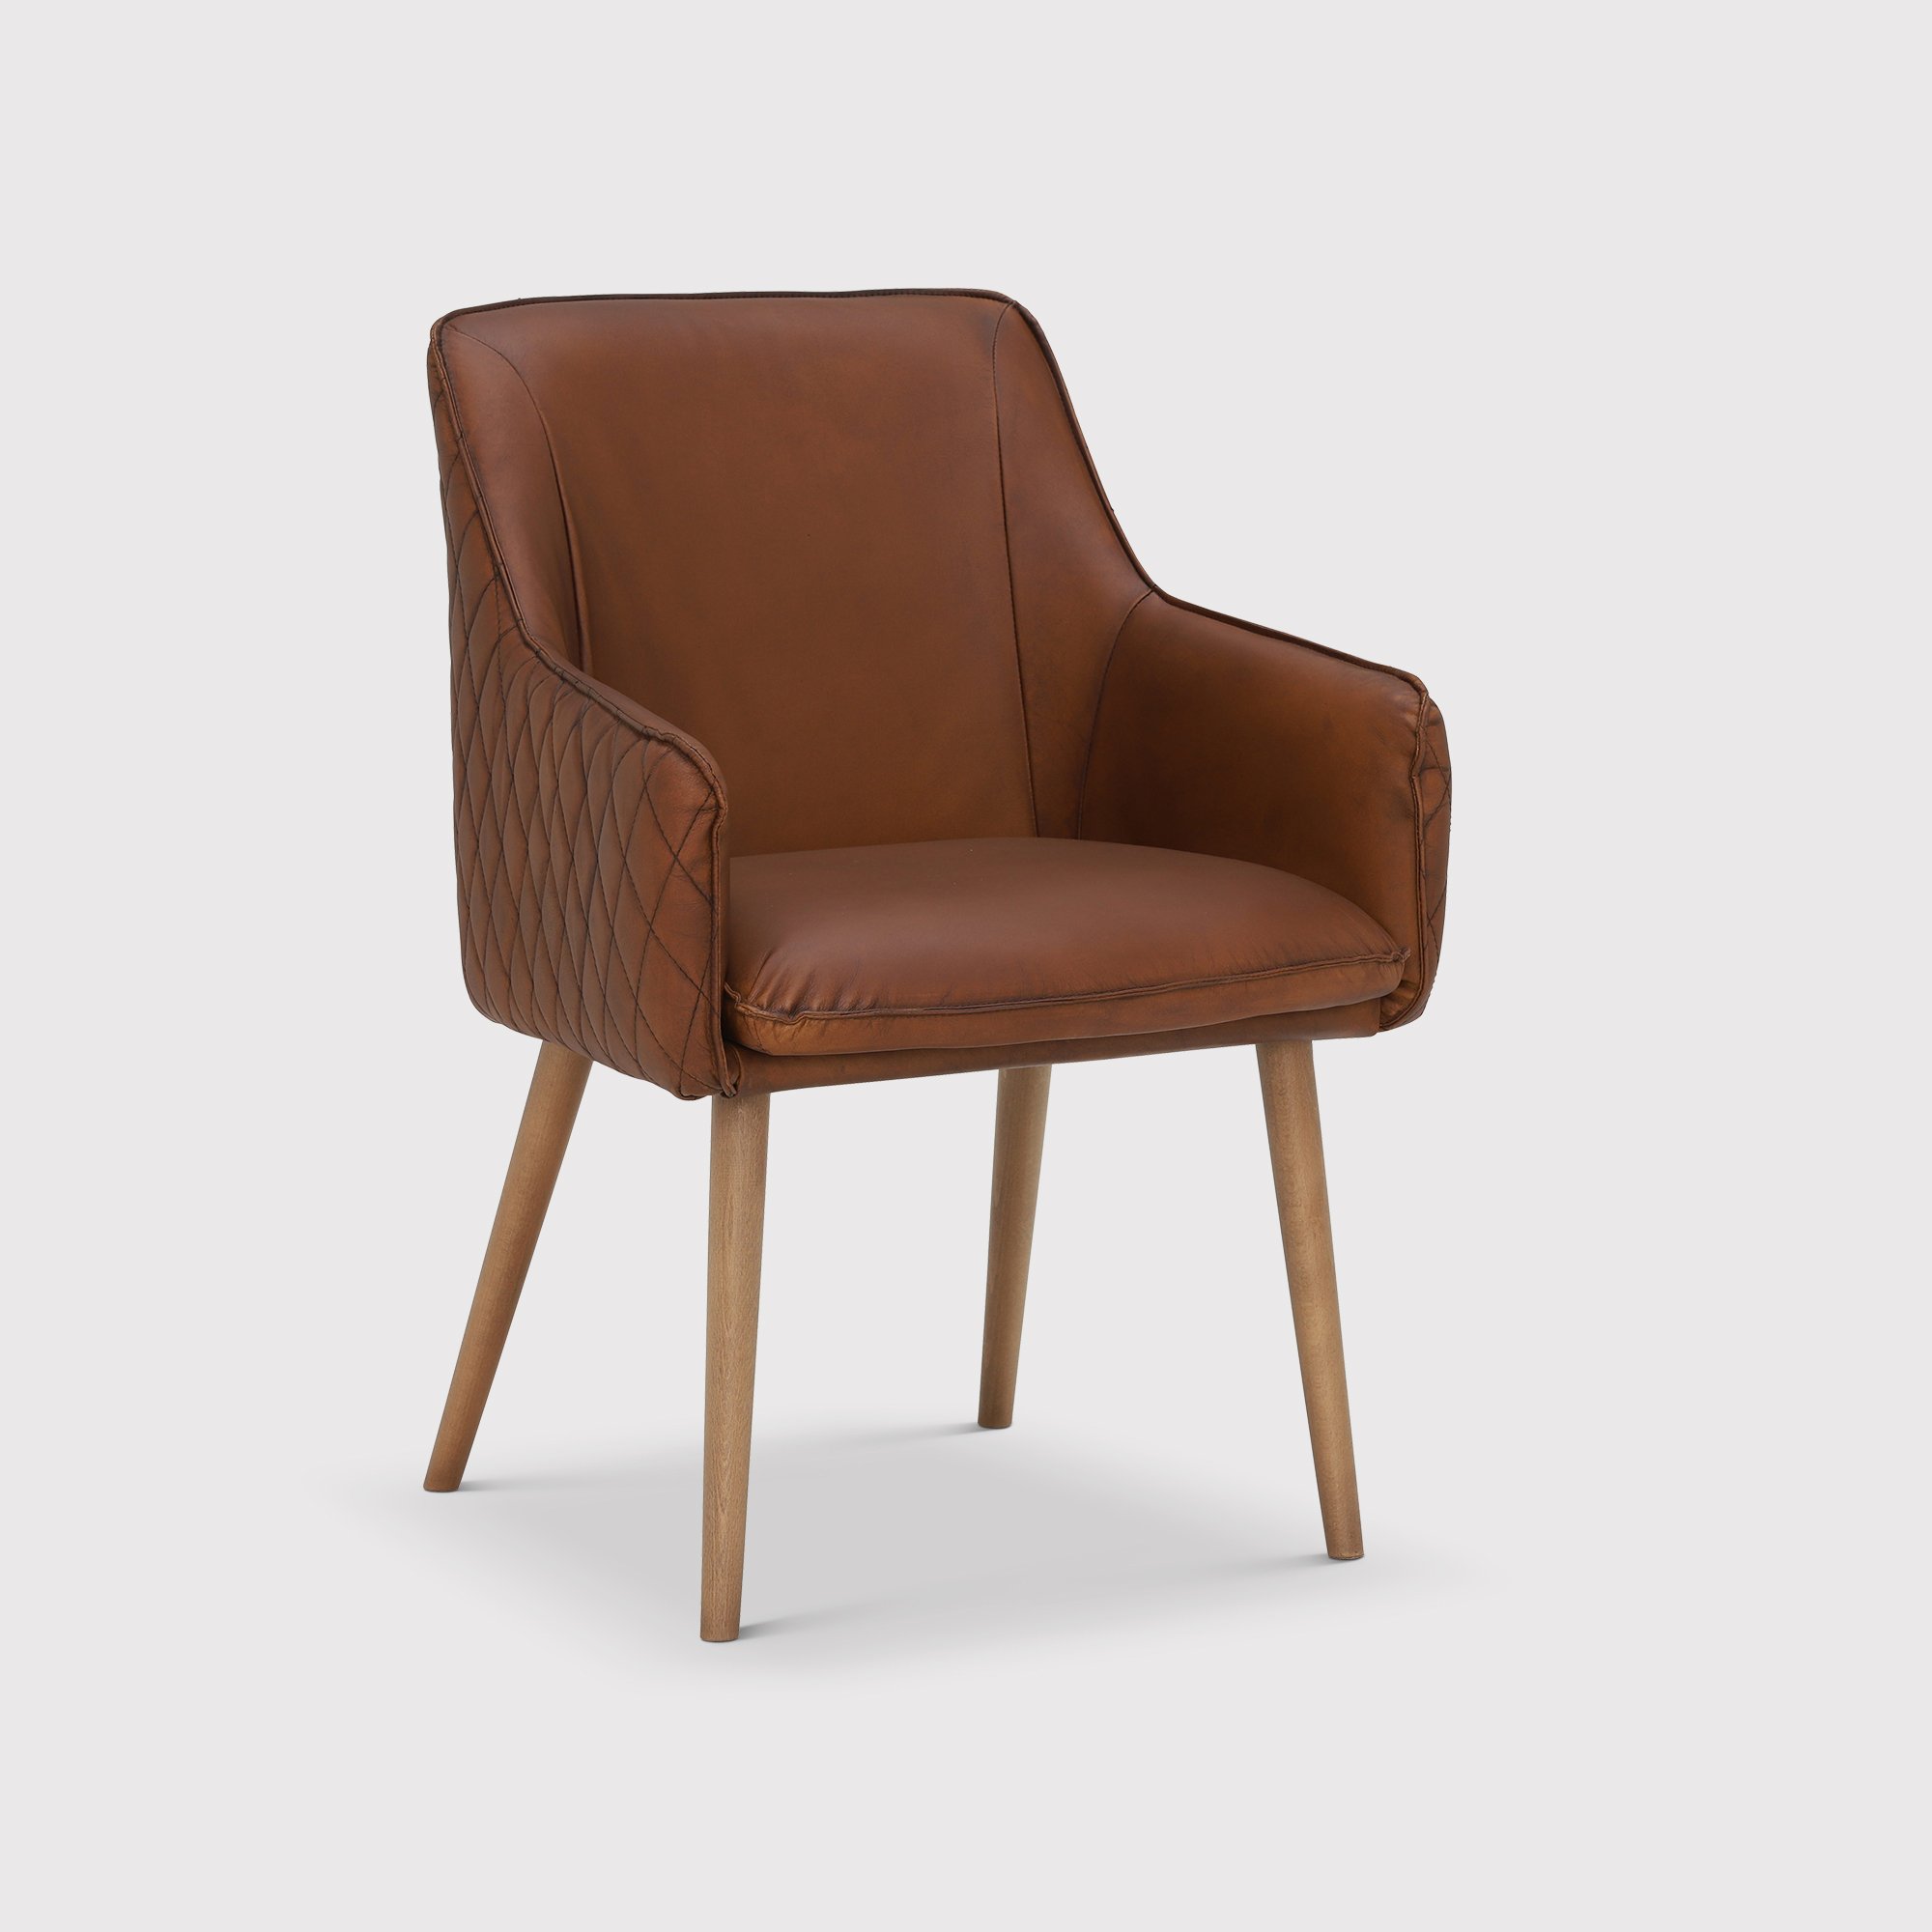 Pure Furniture Antares Dining Dining Chair With Arms, Brown Leather | Barker & Stonehouse